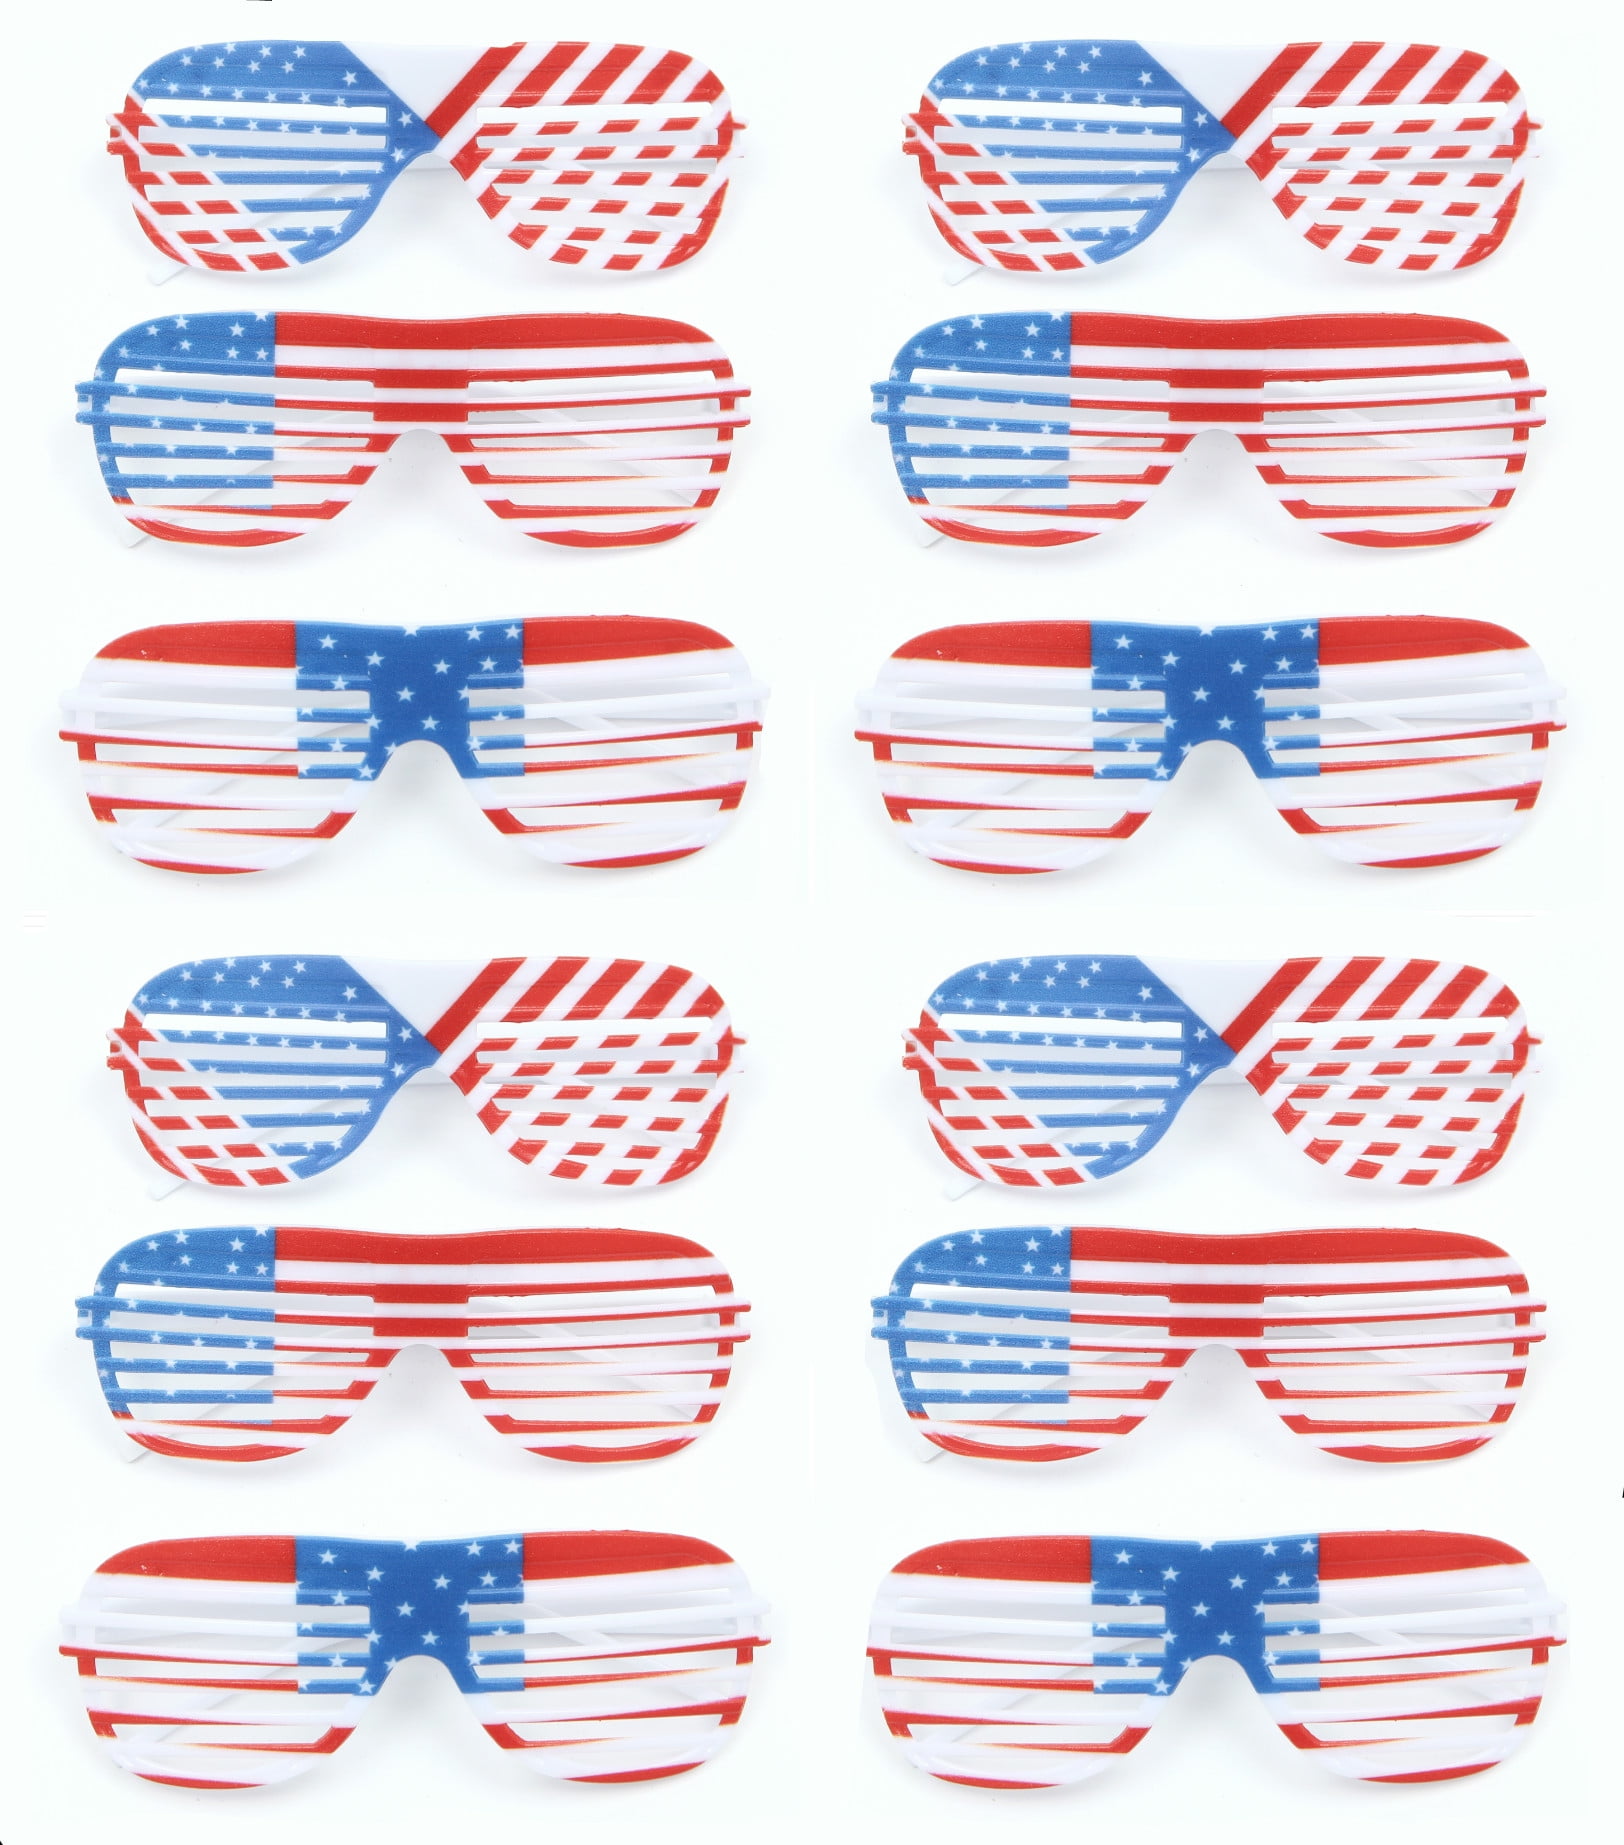 Details about   4th of July American Flag Patriotic Décor Shutter Shades Glasses 24 Pack 